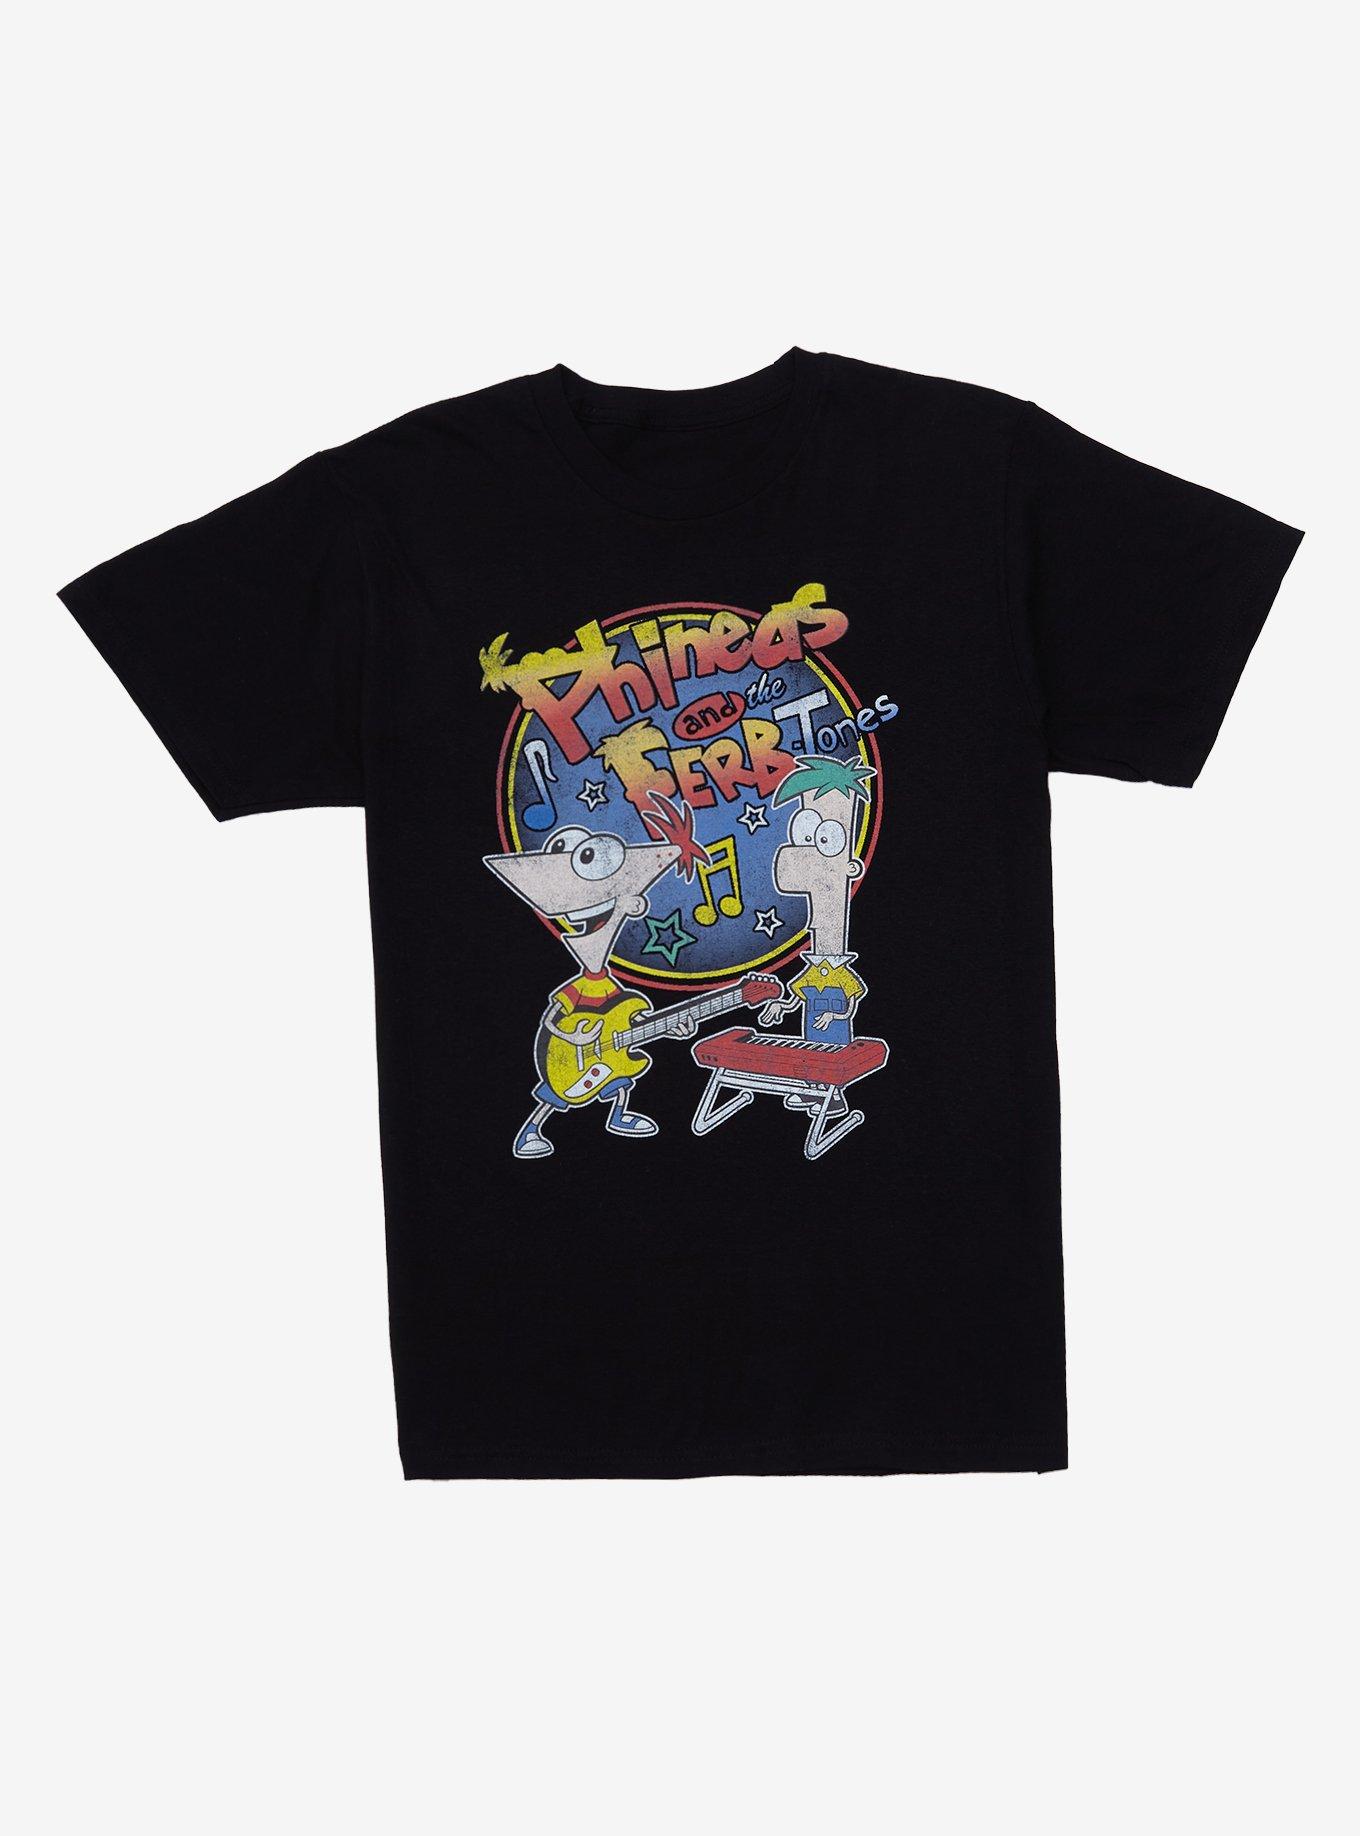 Disney Phineas and Ferb Phineas and the Ferb-Tones T-Shirt - BoxLunch ...